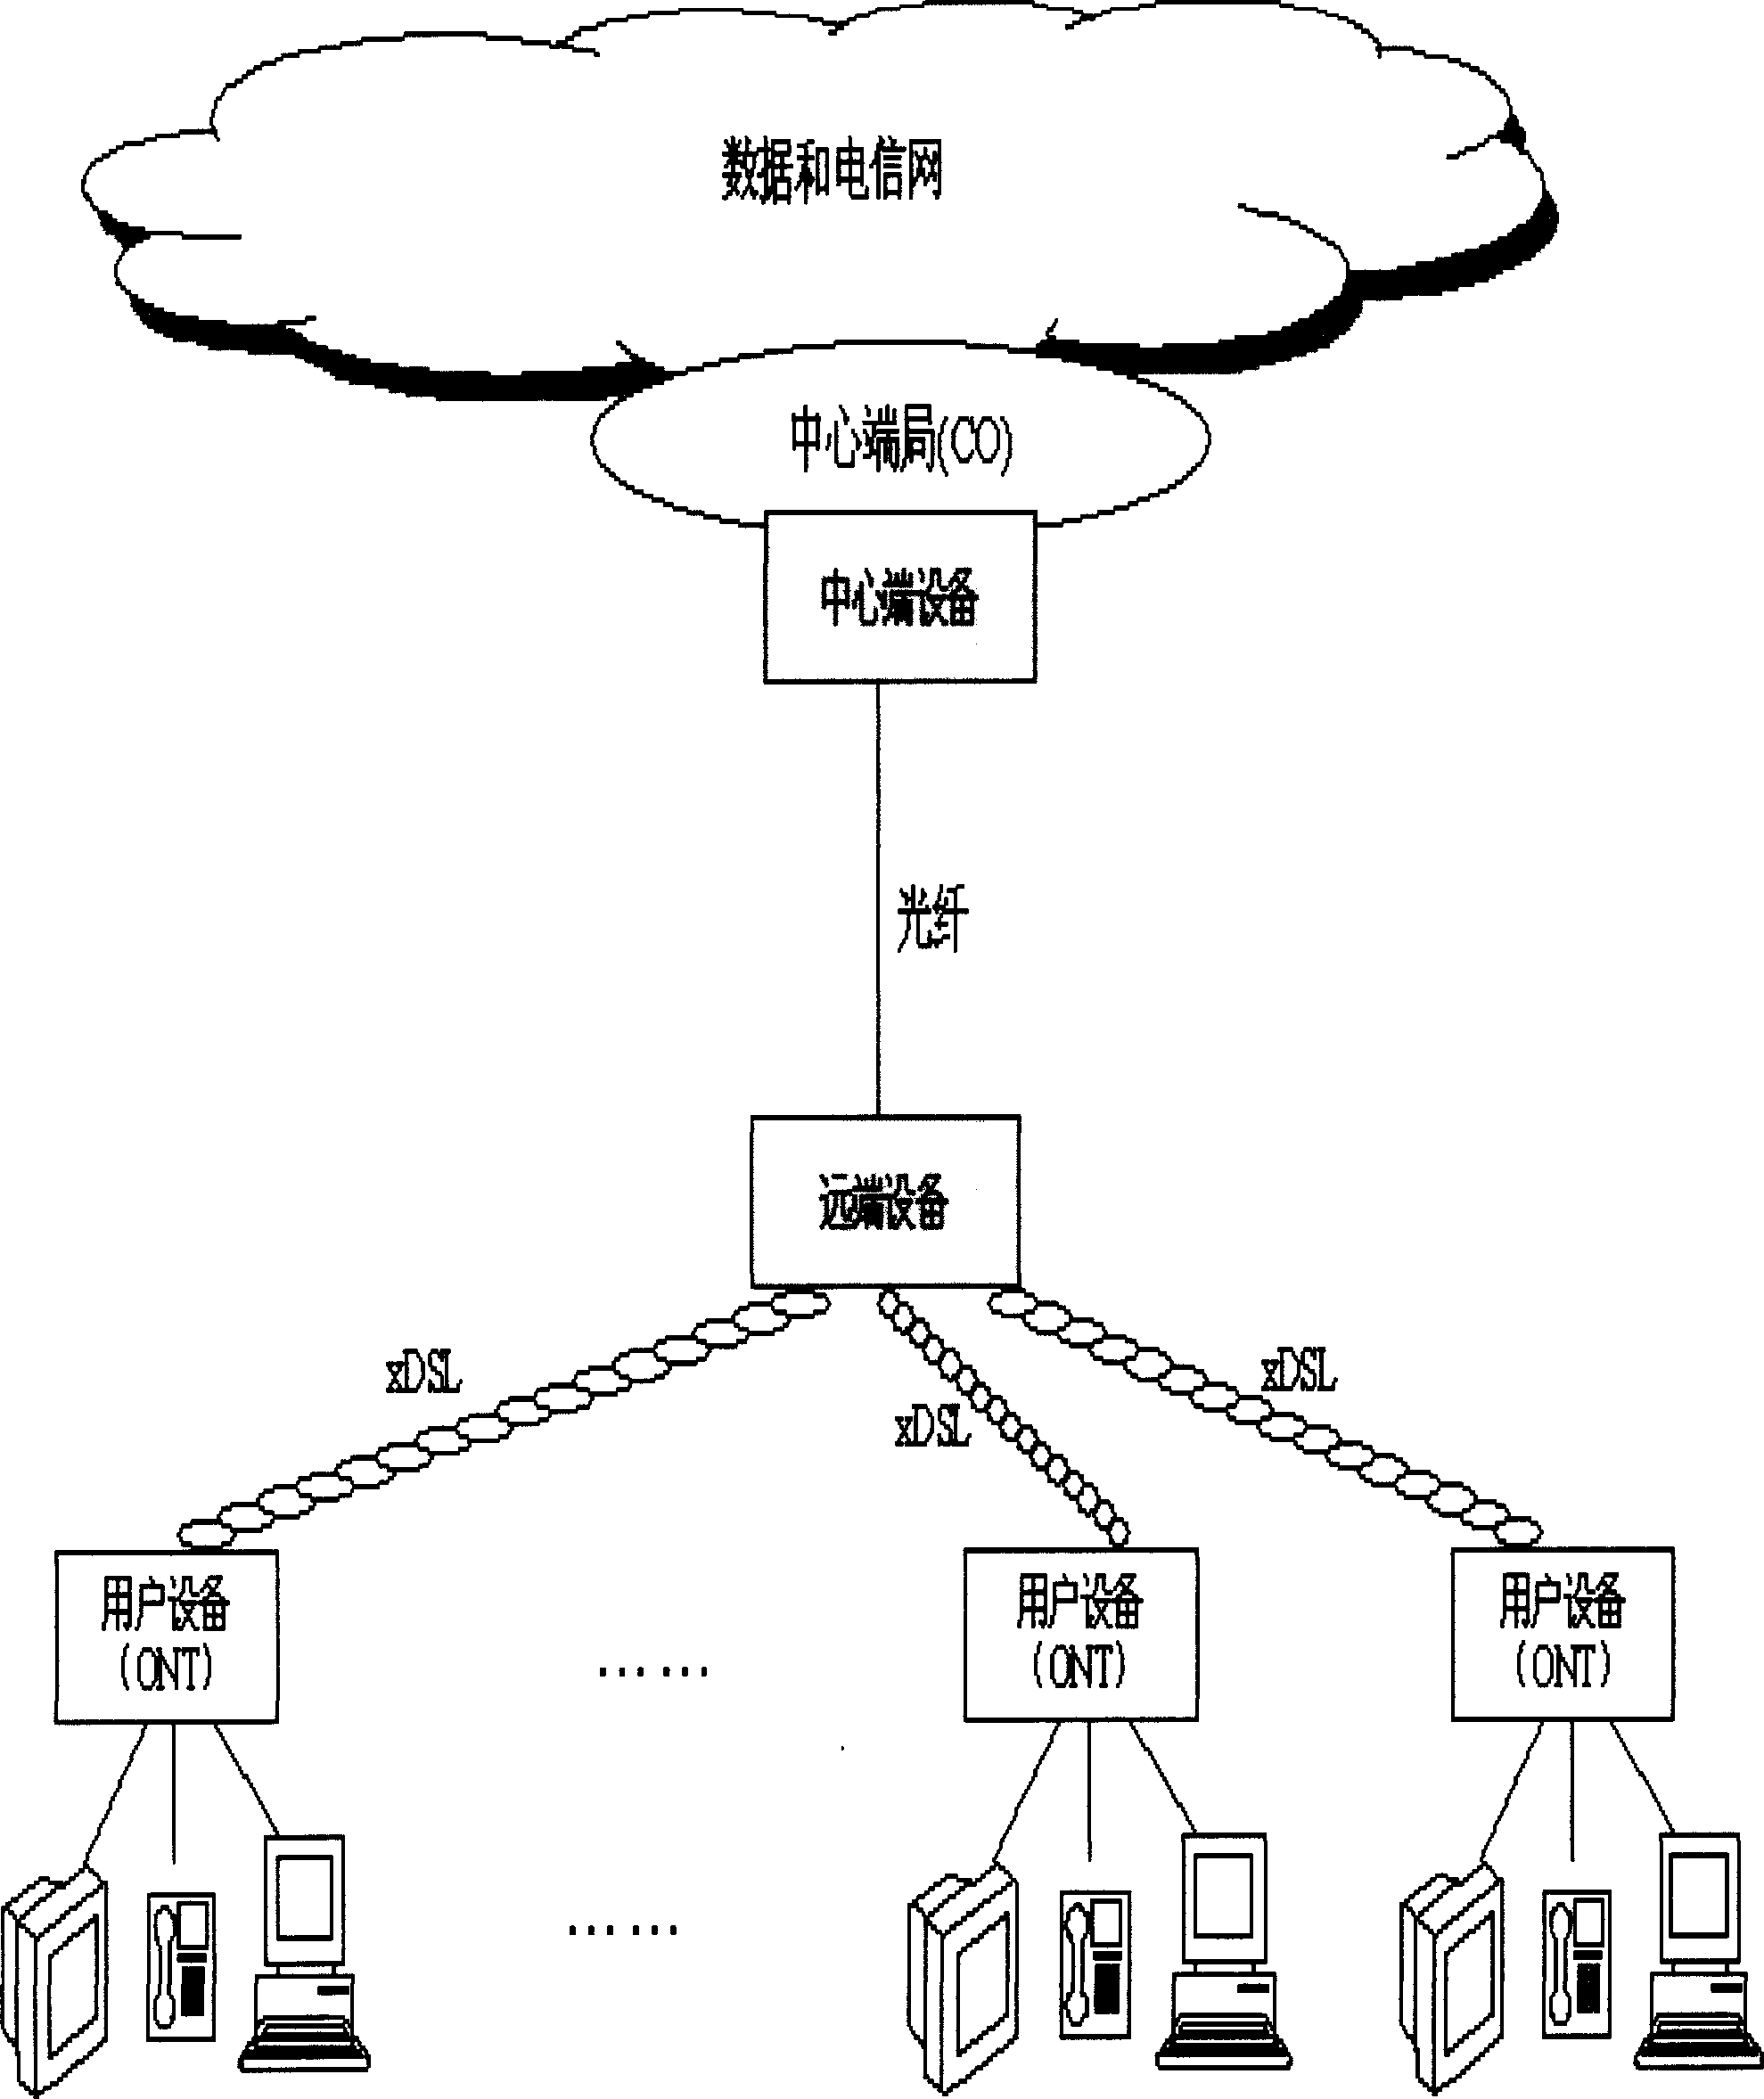 Multi-carrier light transmitting method of light access system with multi-path signal